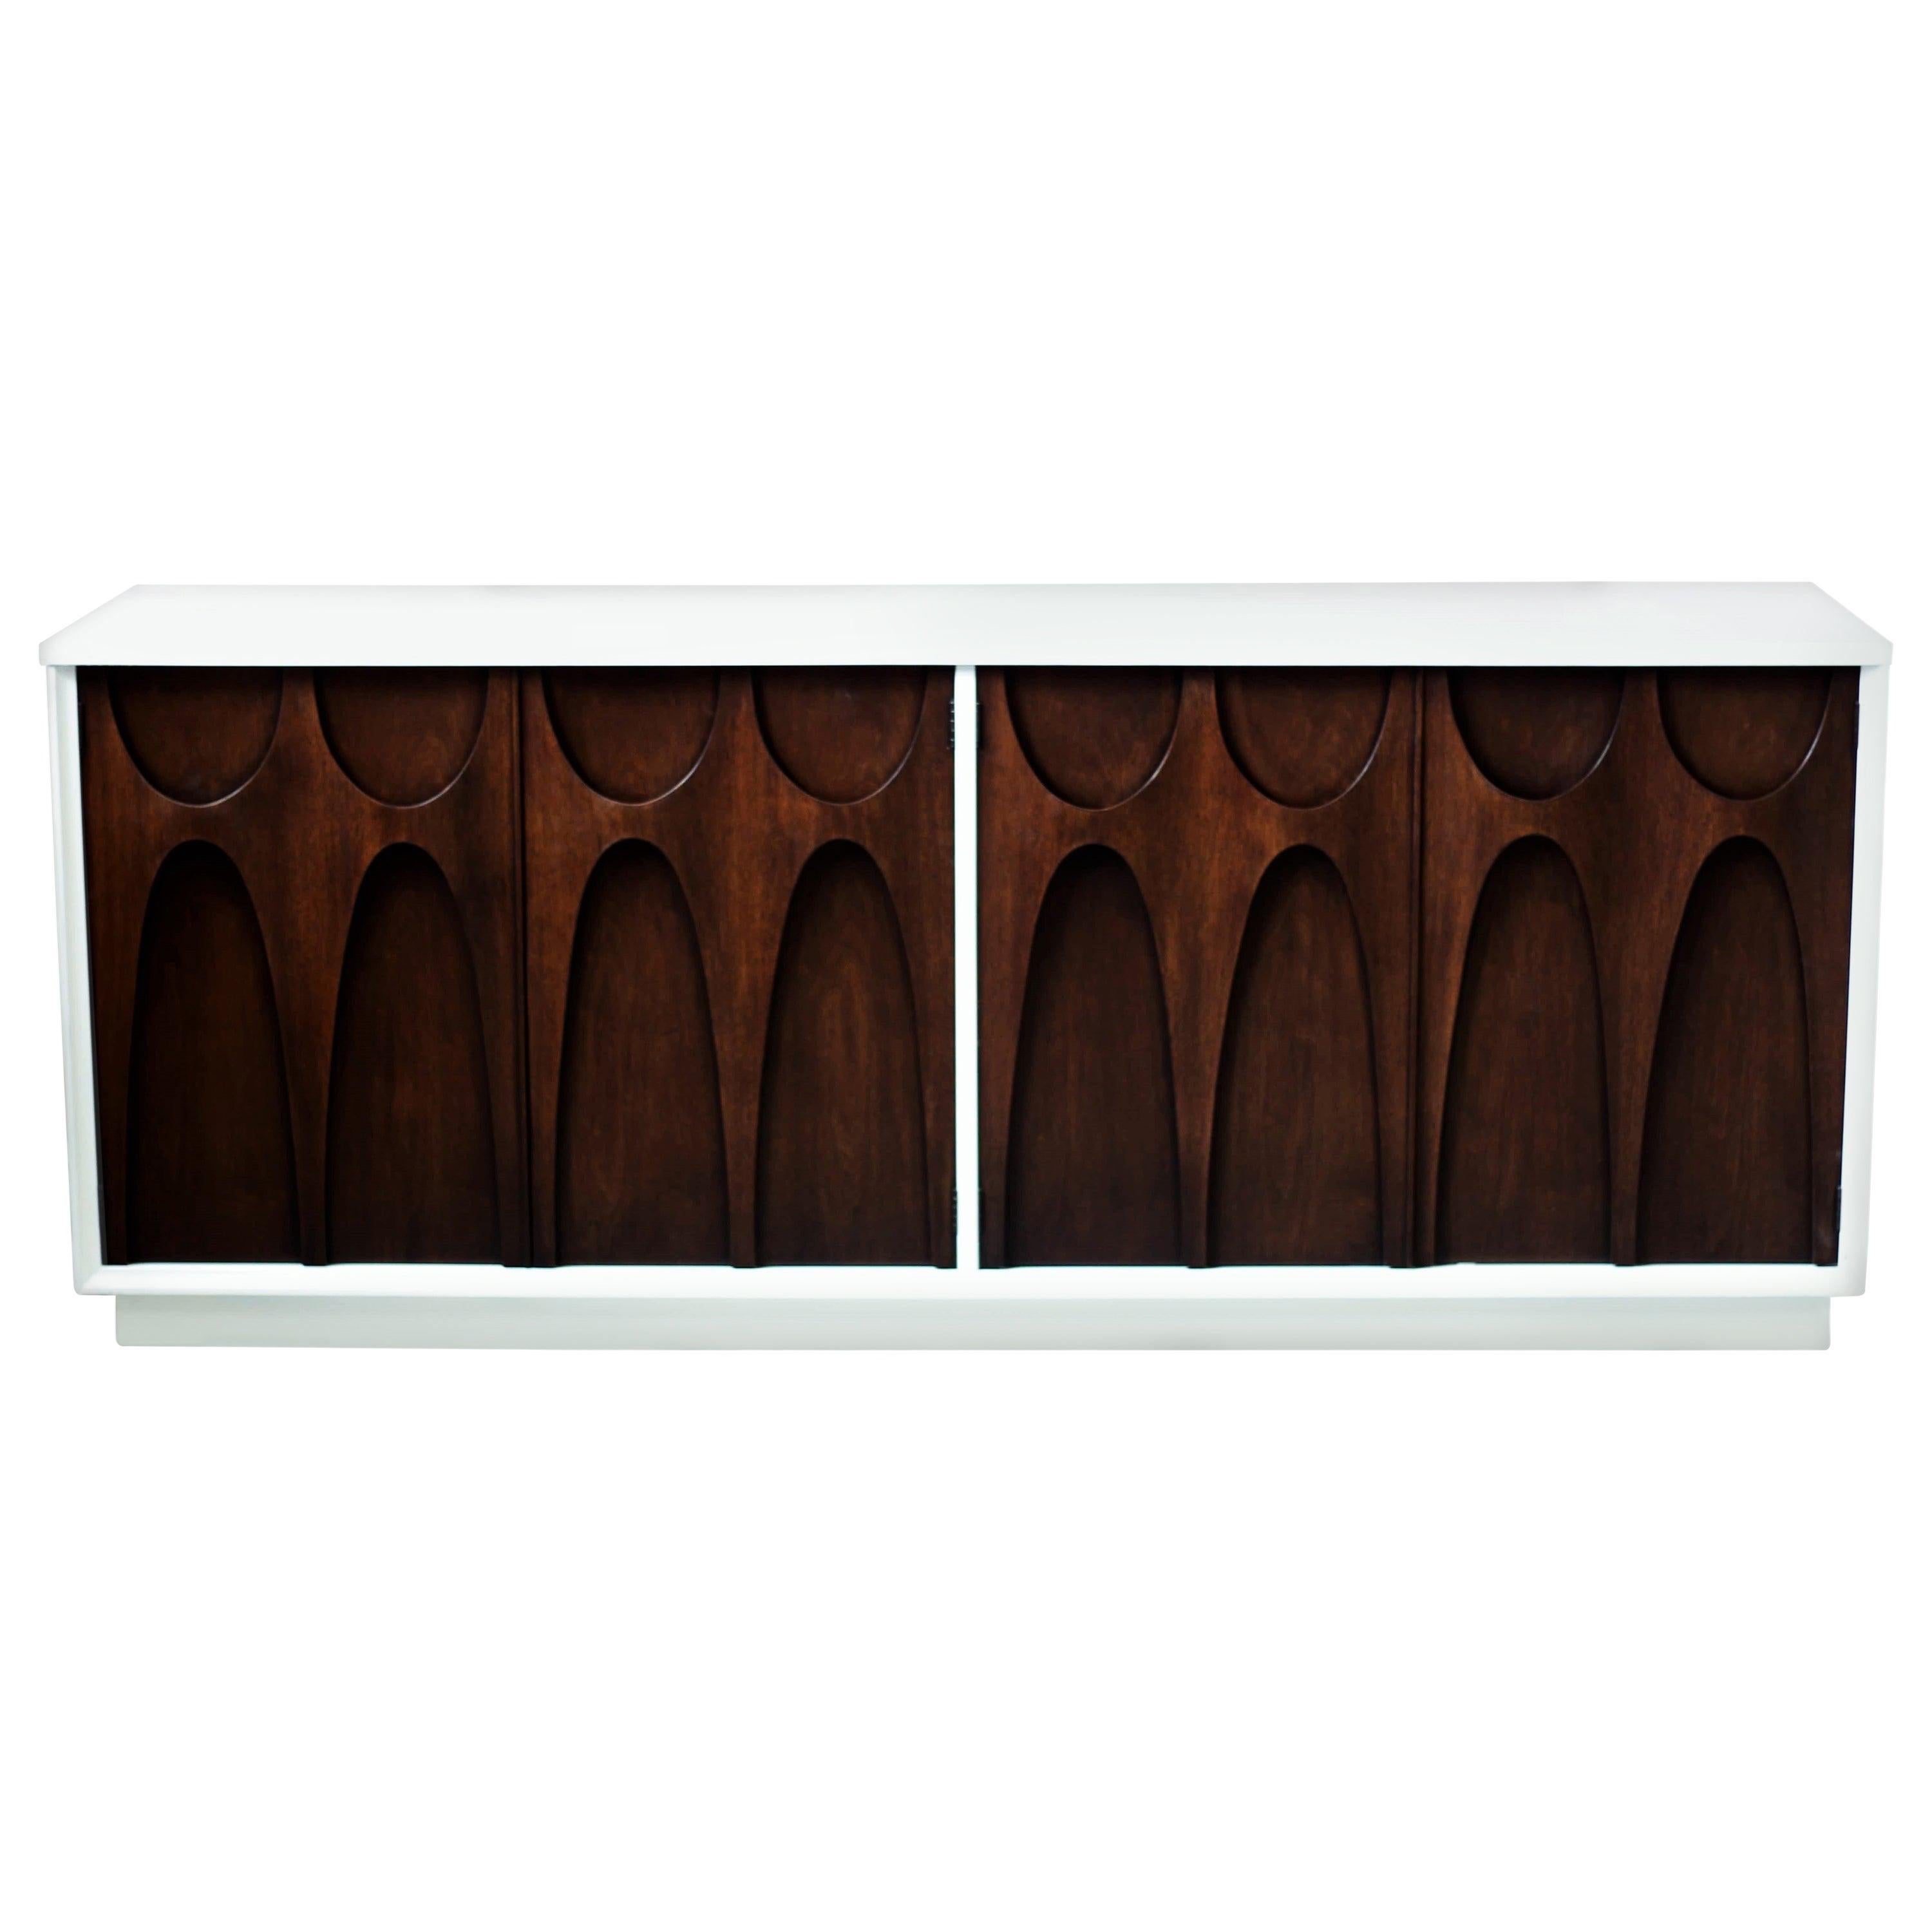 Sculpted Two-Toned Brasilia Walnut Credenza by Broyhill